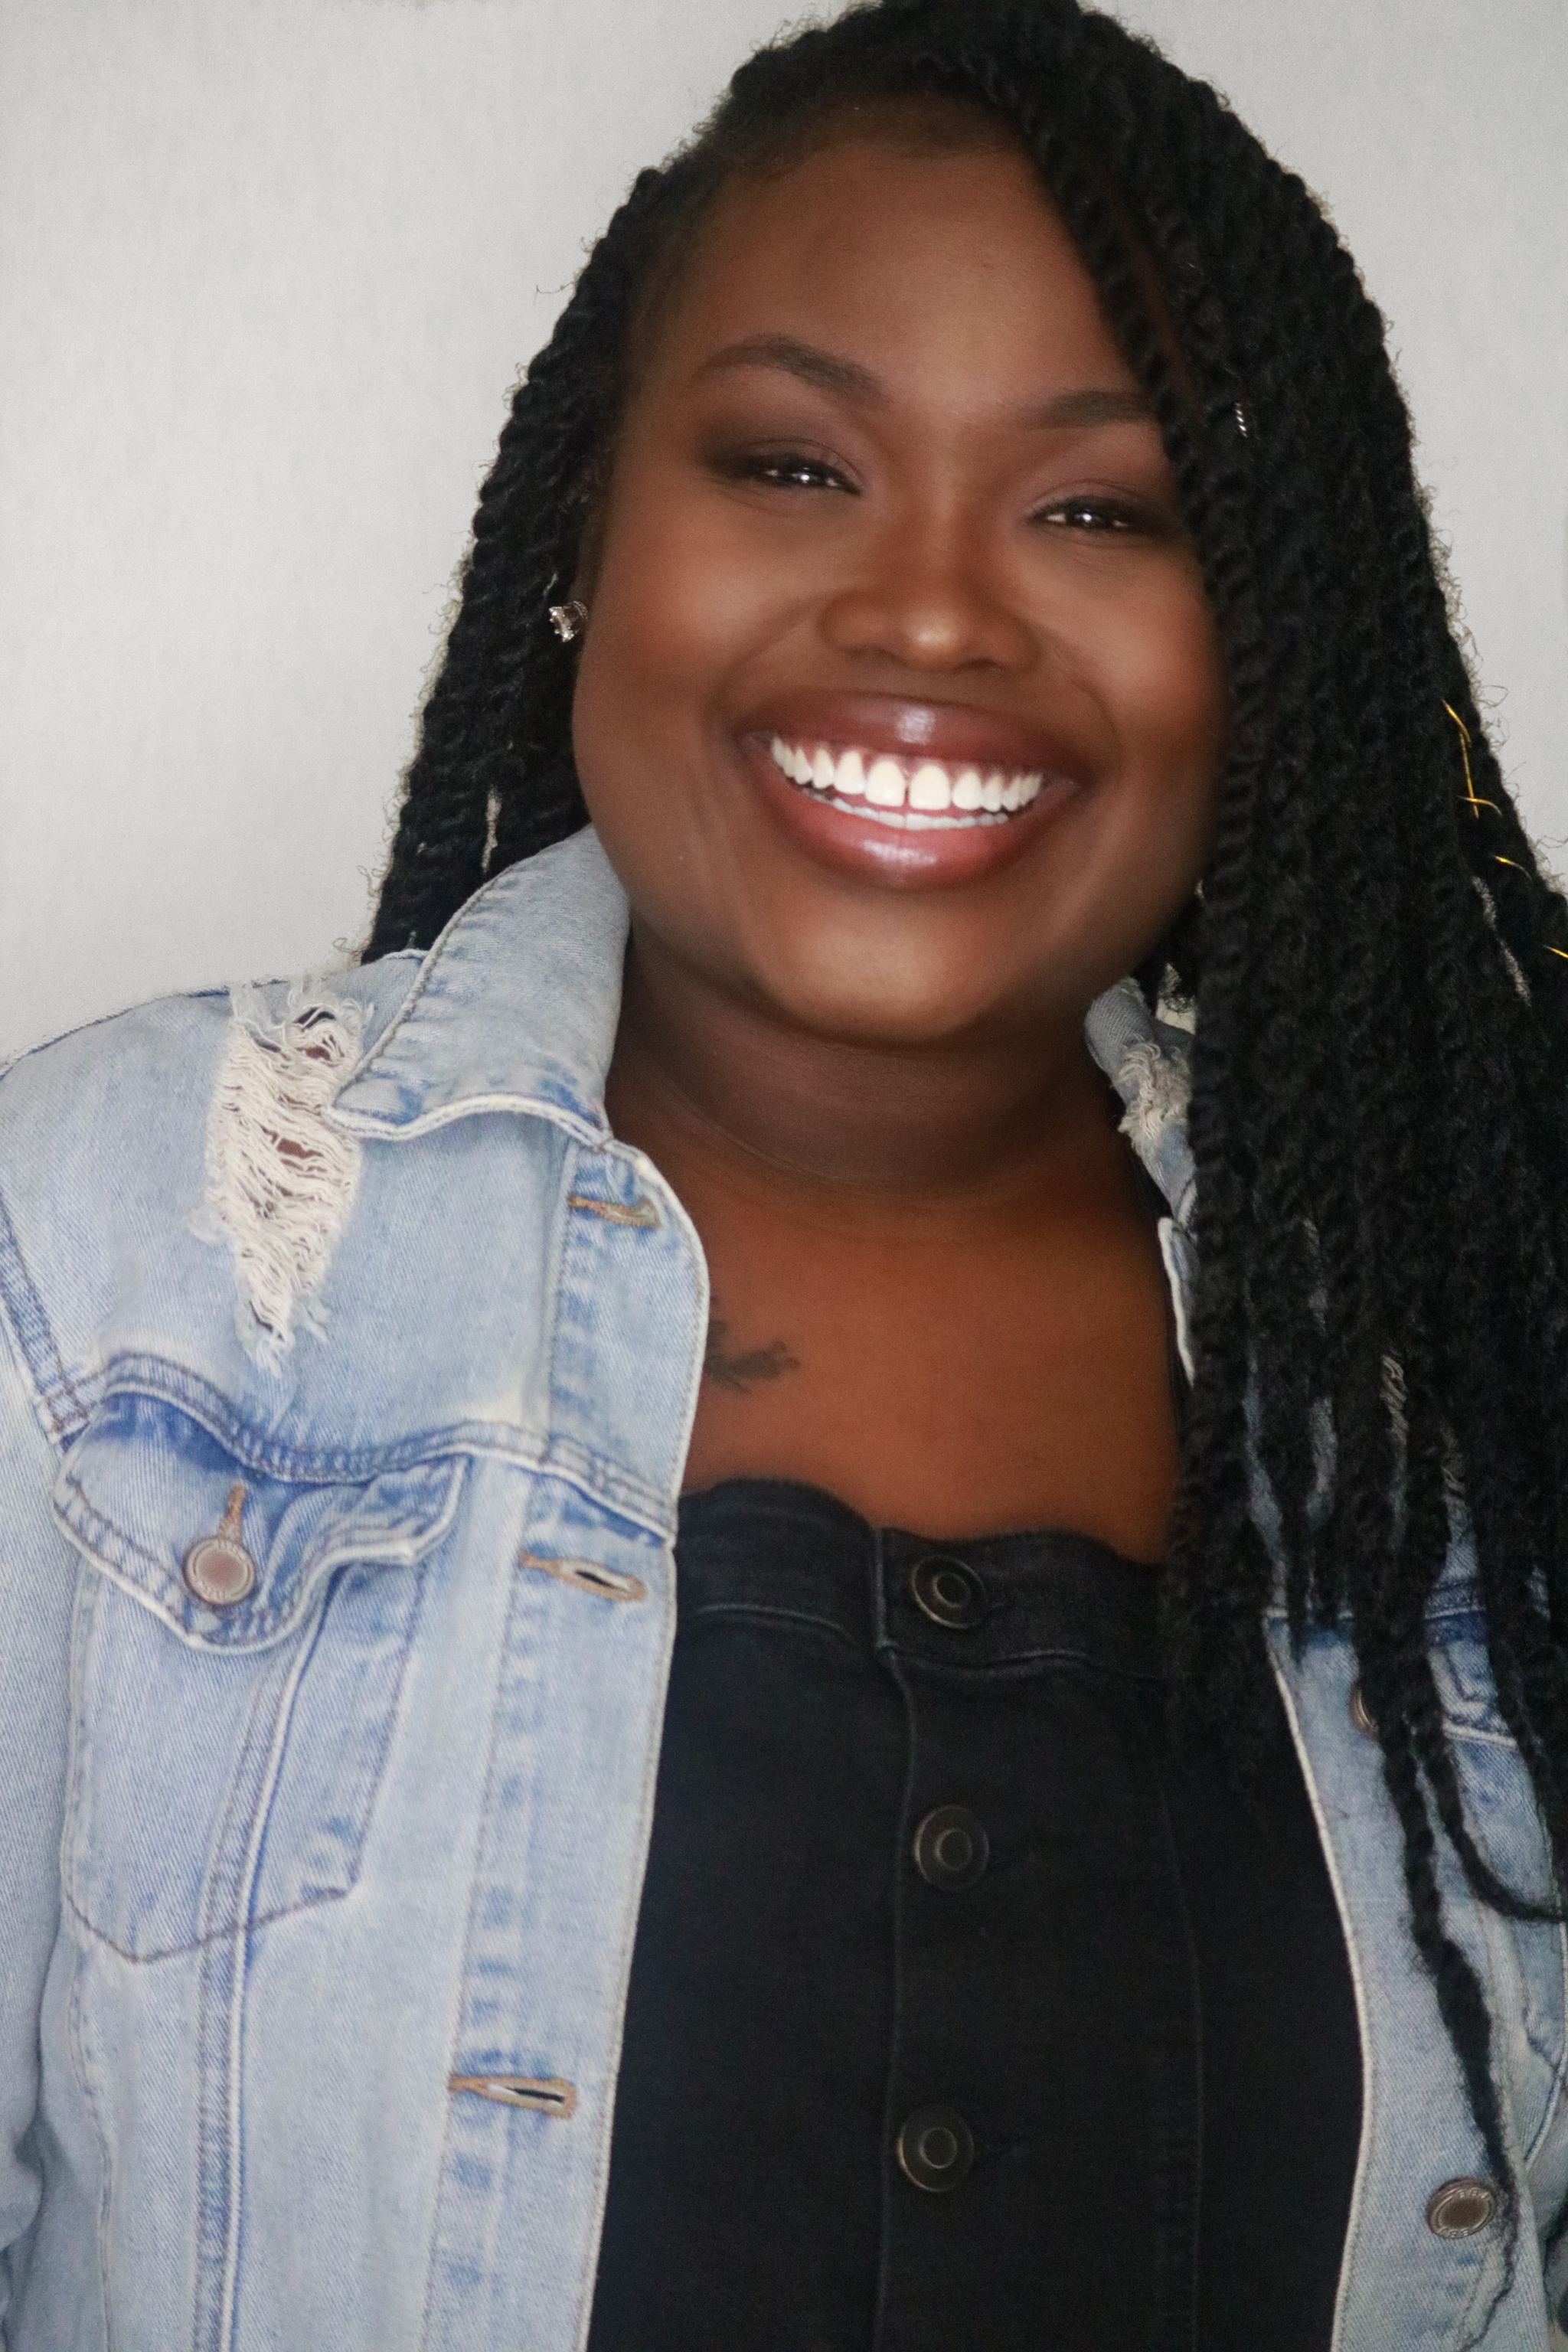 A Black woman with her hair in long braids smiles. She wears a light blue jean jacket and a black shirt underneath it.